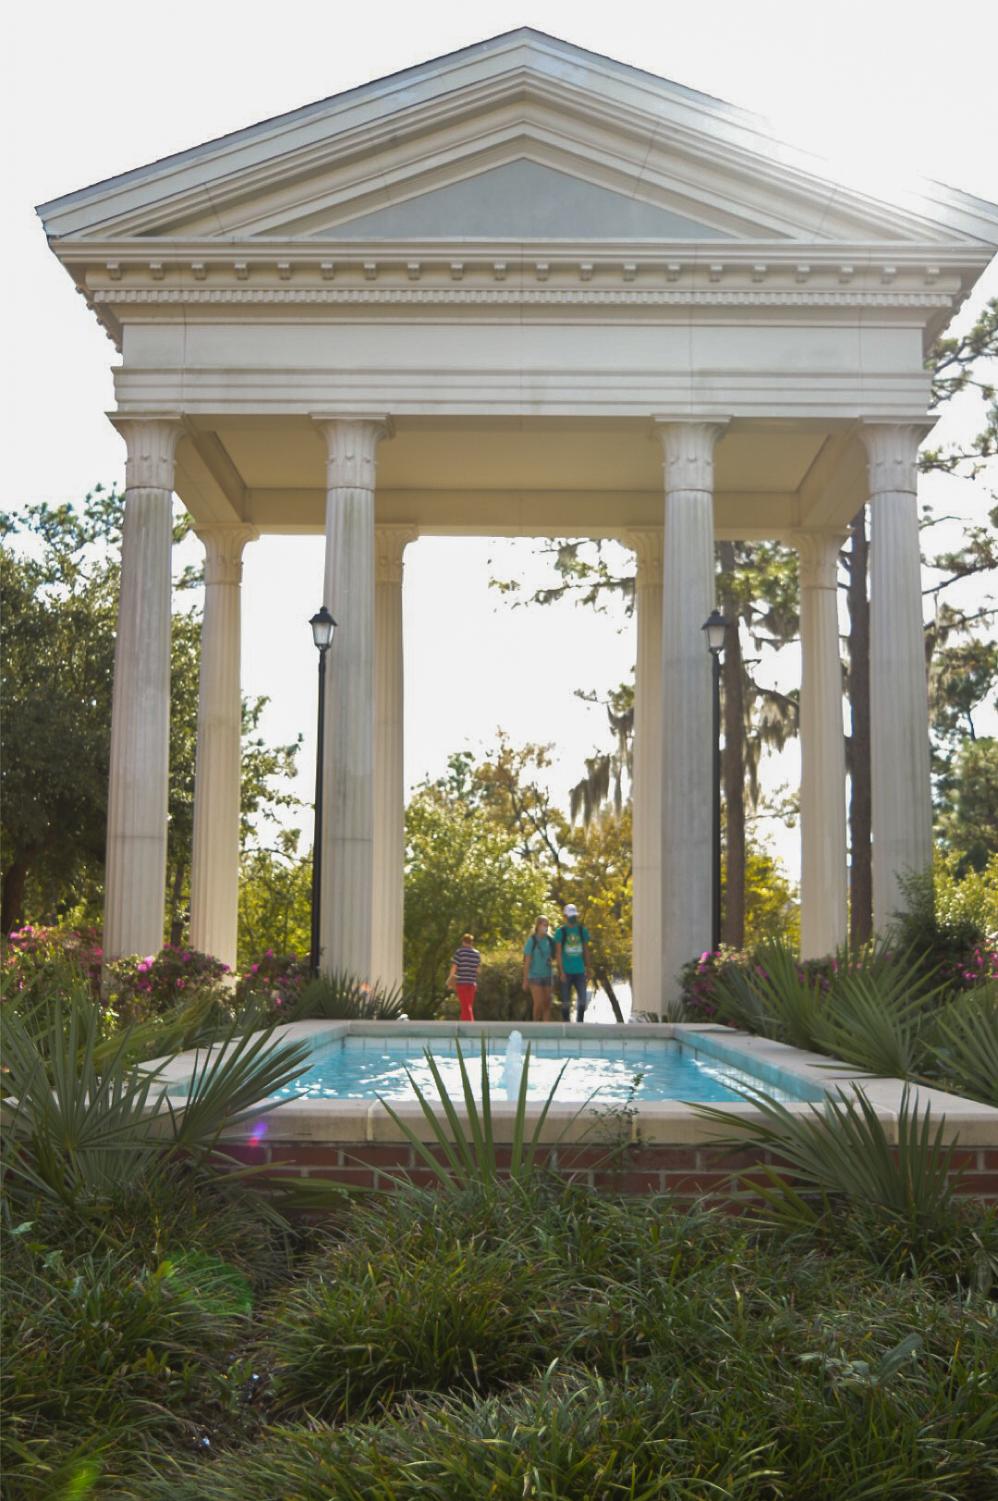 UNCW offering inperson and virtual spring graduation ceremonies The